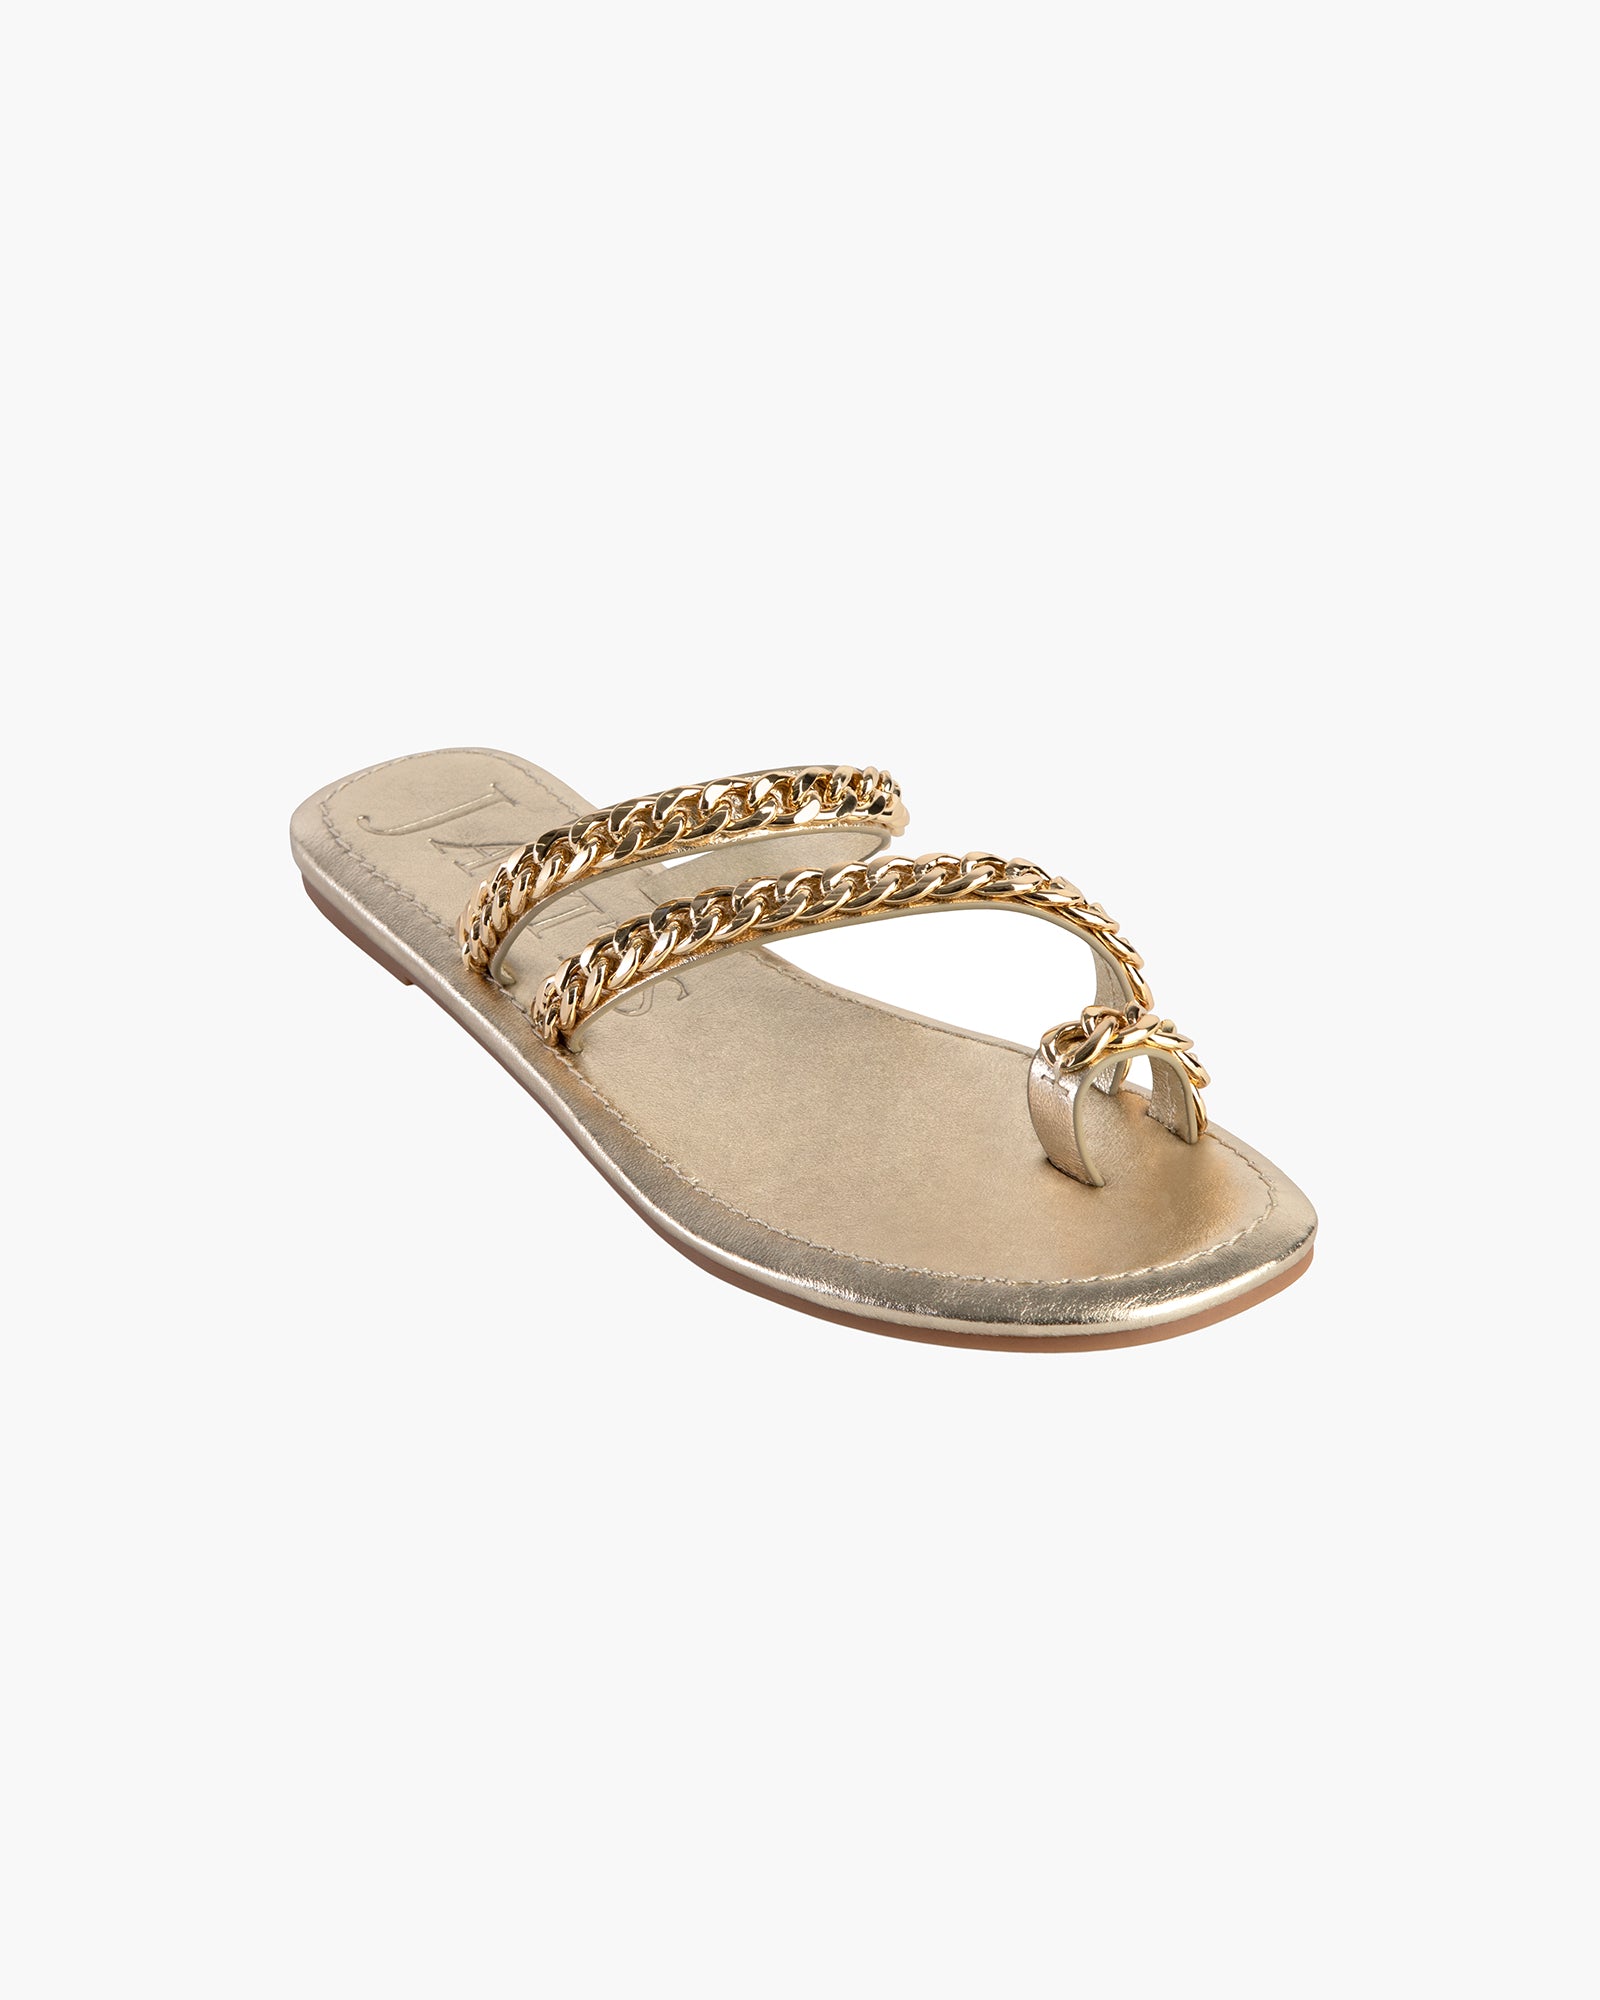 Eric Javits Women's Chainmi Toe Loop Summer Sandal, Chain-embellished Leather Straps, Metallic Leather Footbed, Gold Color - Size 10